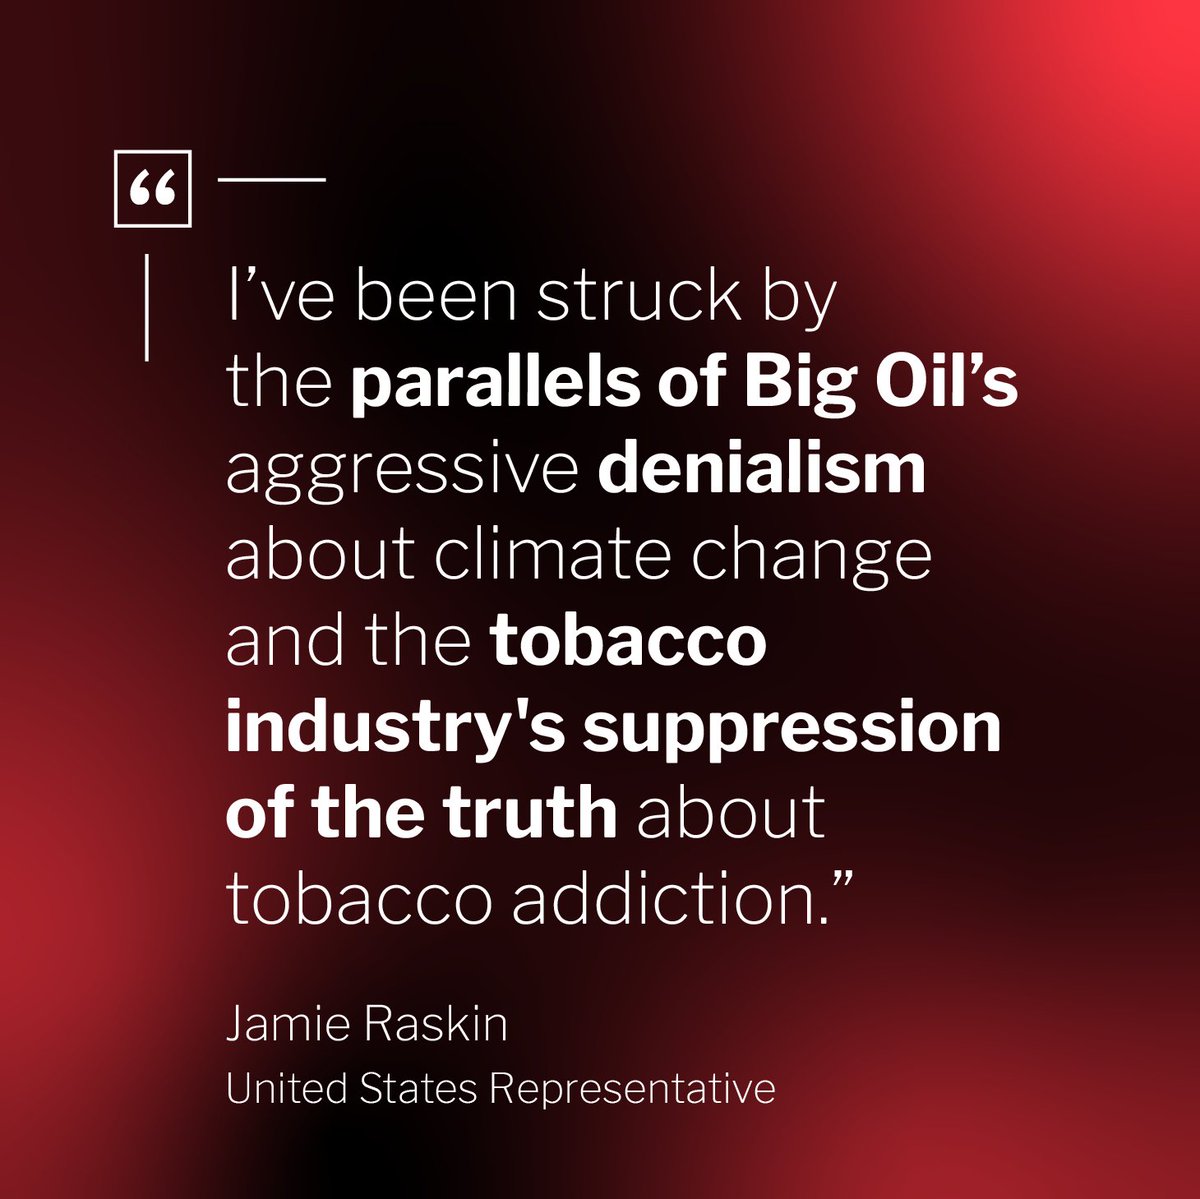 Big Oil and Big Tobacco both knew they were selling dangerous products — and lied about it. At a @SenateBudget hearing earlier this month, @RepRaskin called out the industries' similar tactics. Like Big Tobacco, Big Oil must be held accountable. climateintegrity.org/news/senate-he…